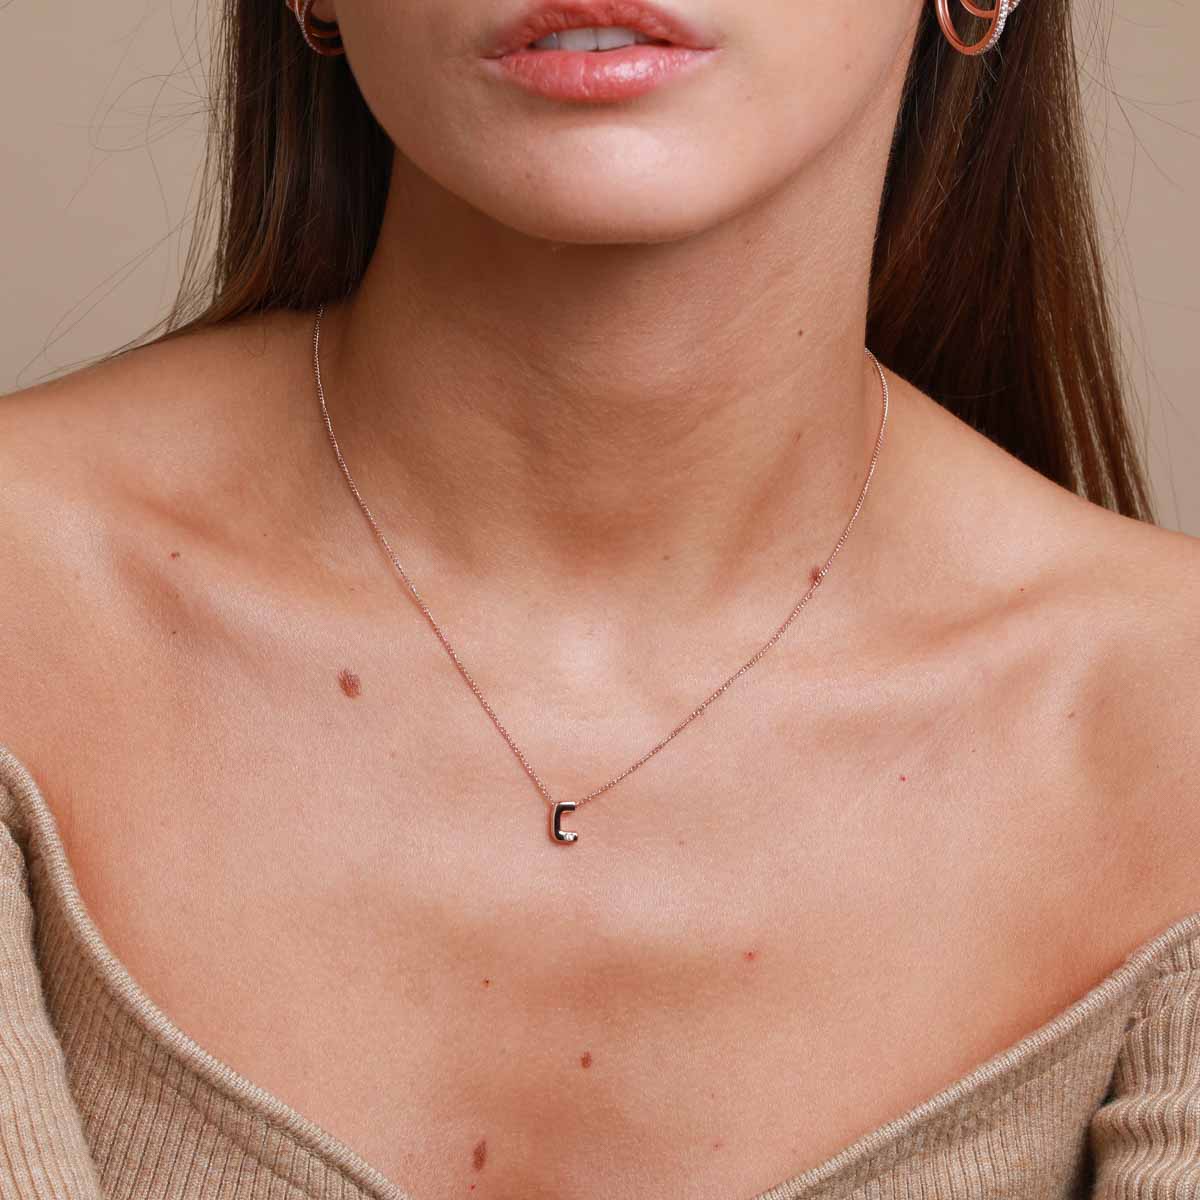 C Initial Pendant Necklace in Rose Gold worn